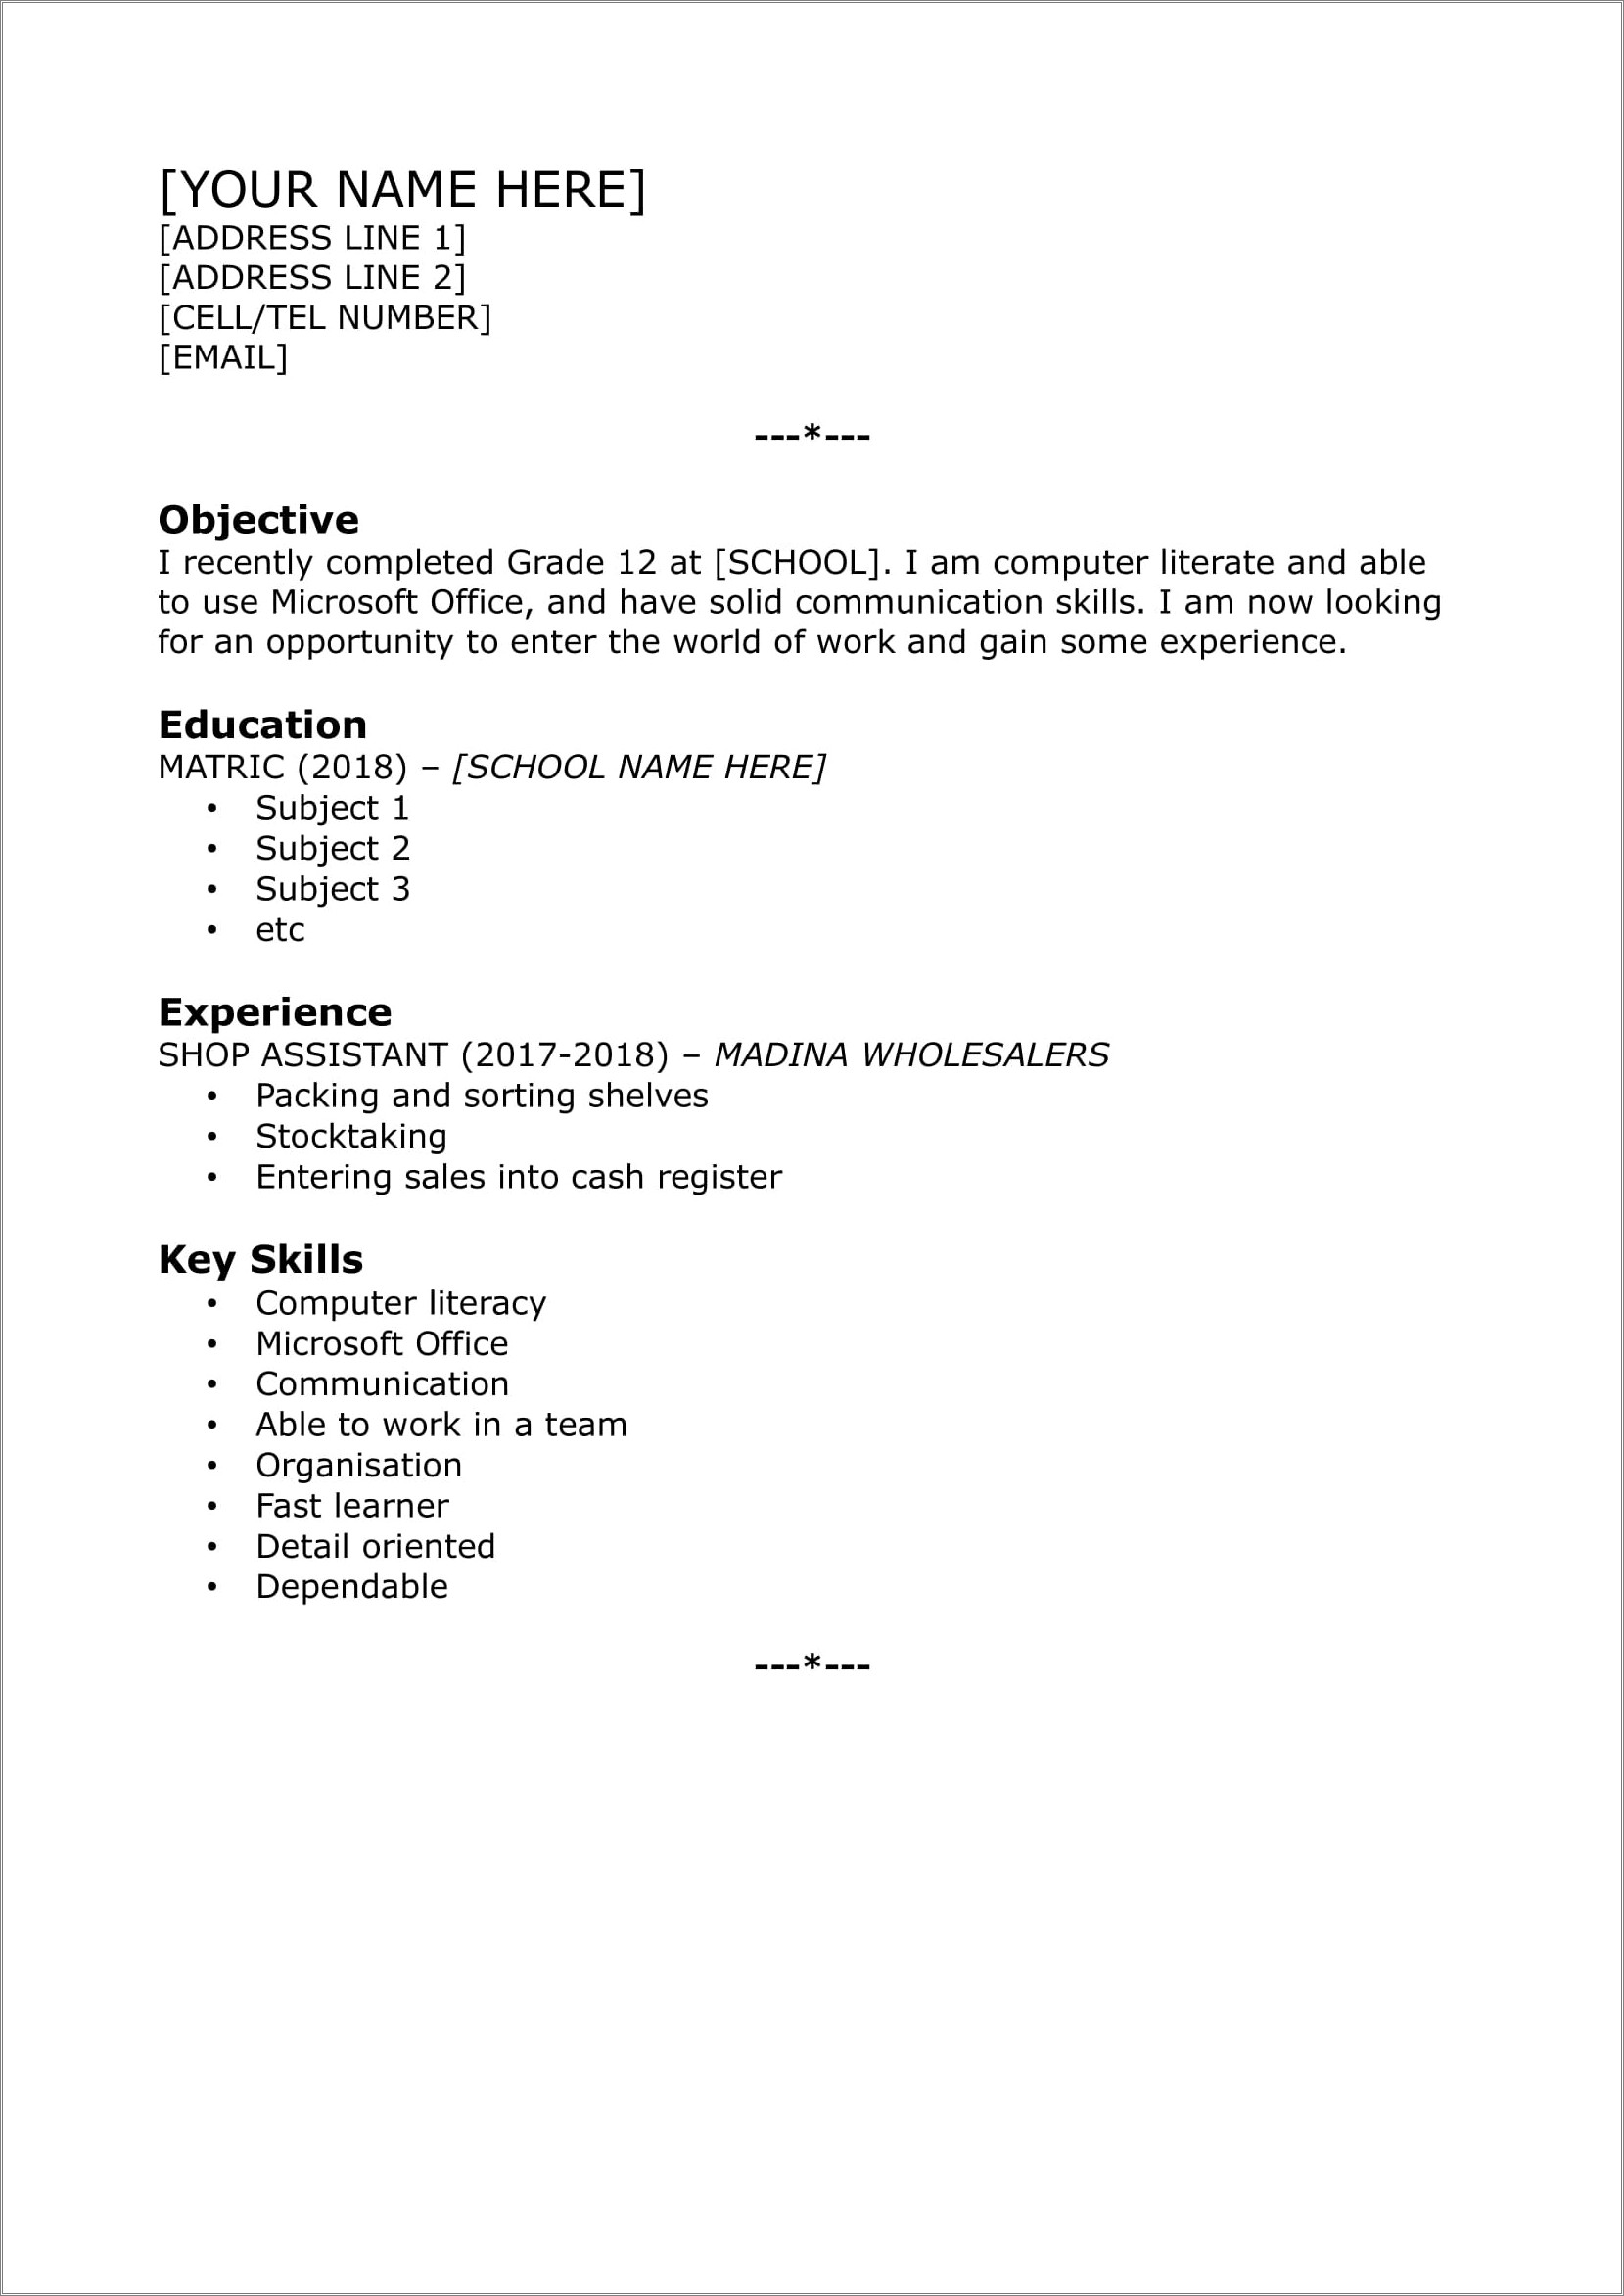 Resume Template For People With No Experience